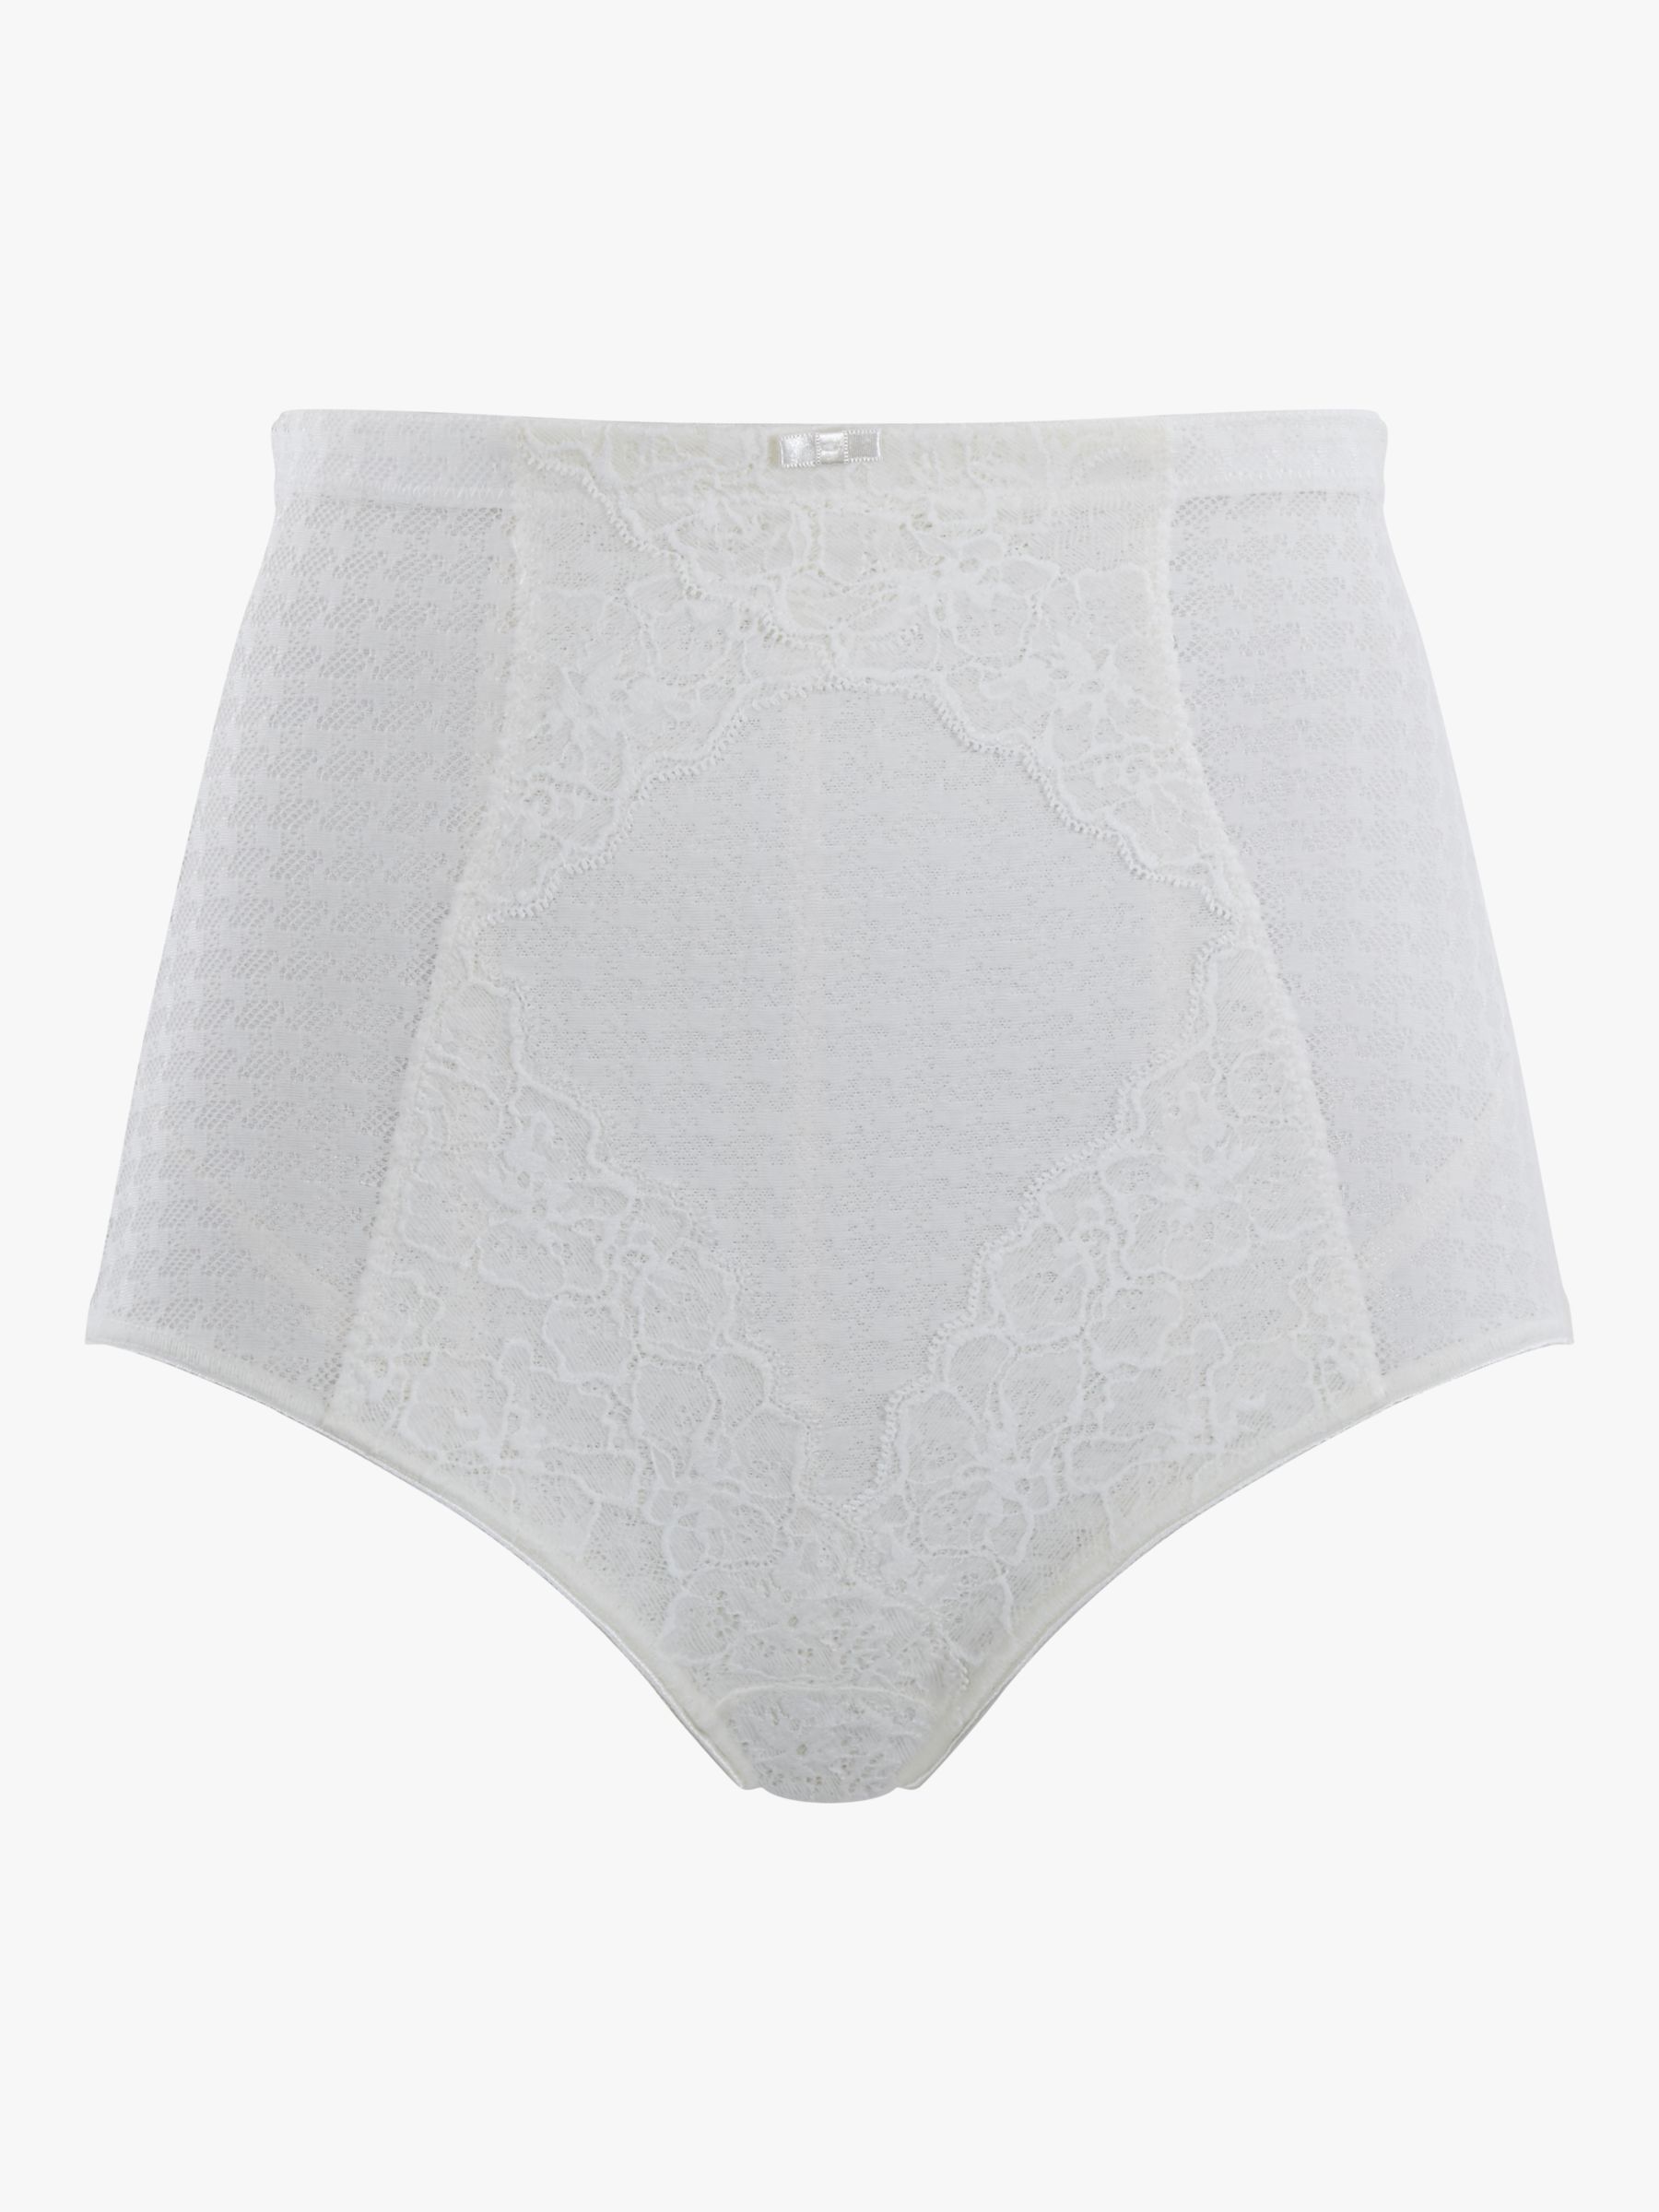 Panache Envy High Waist Knickers, Ivory at John Lewis & Partners